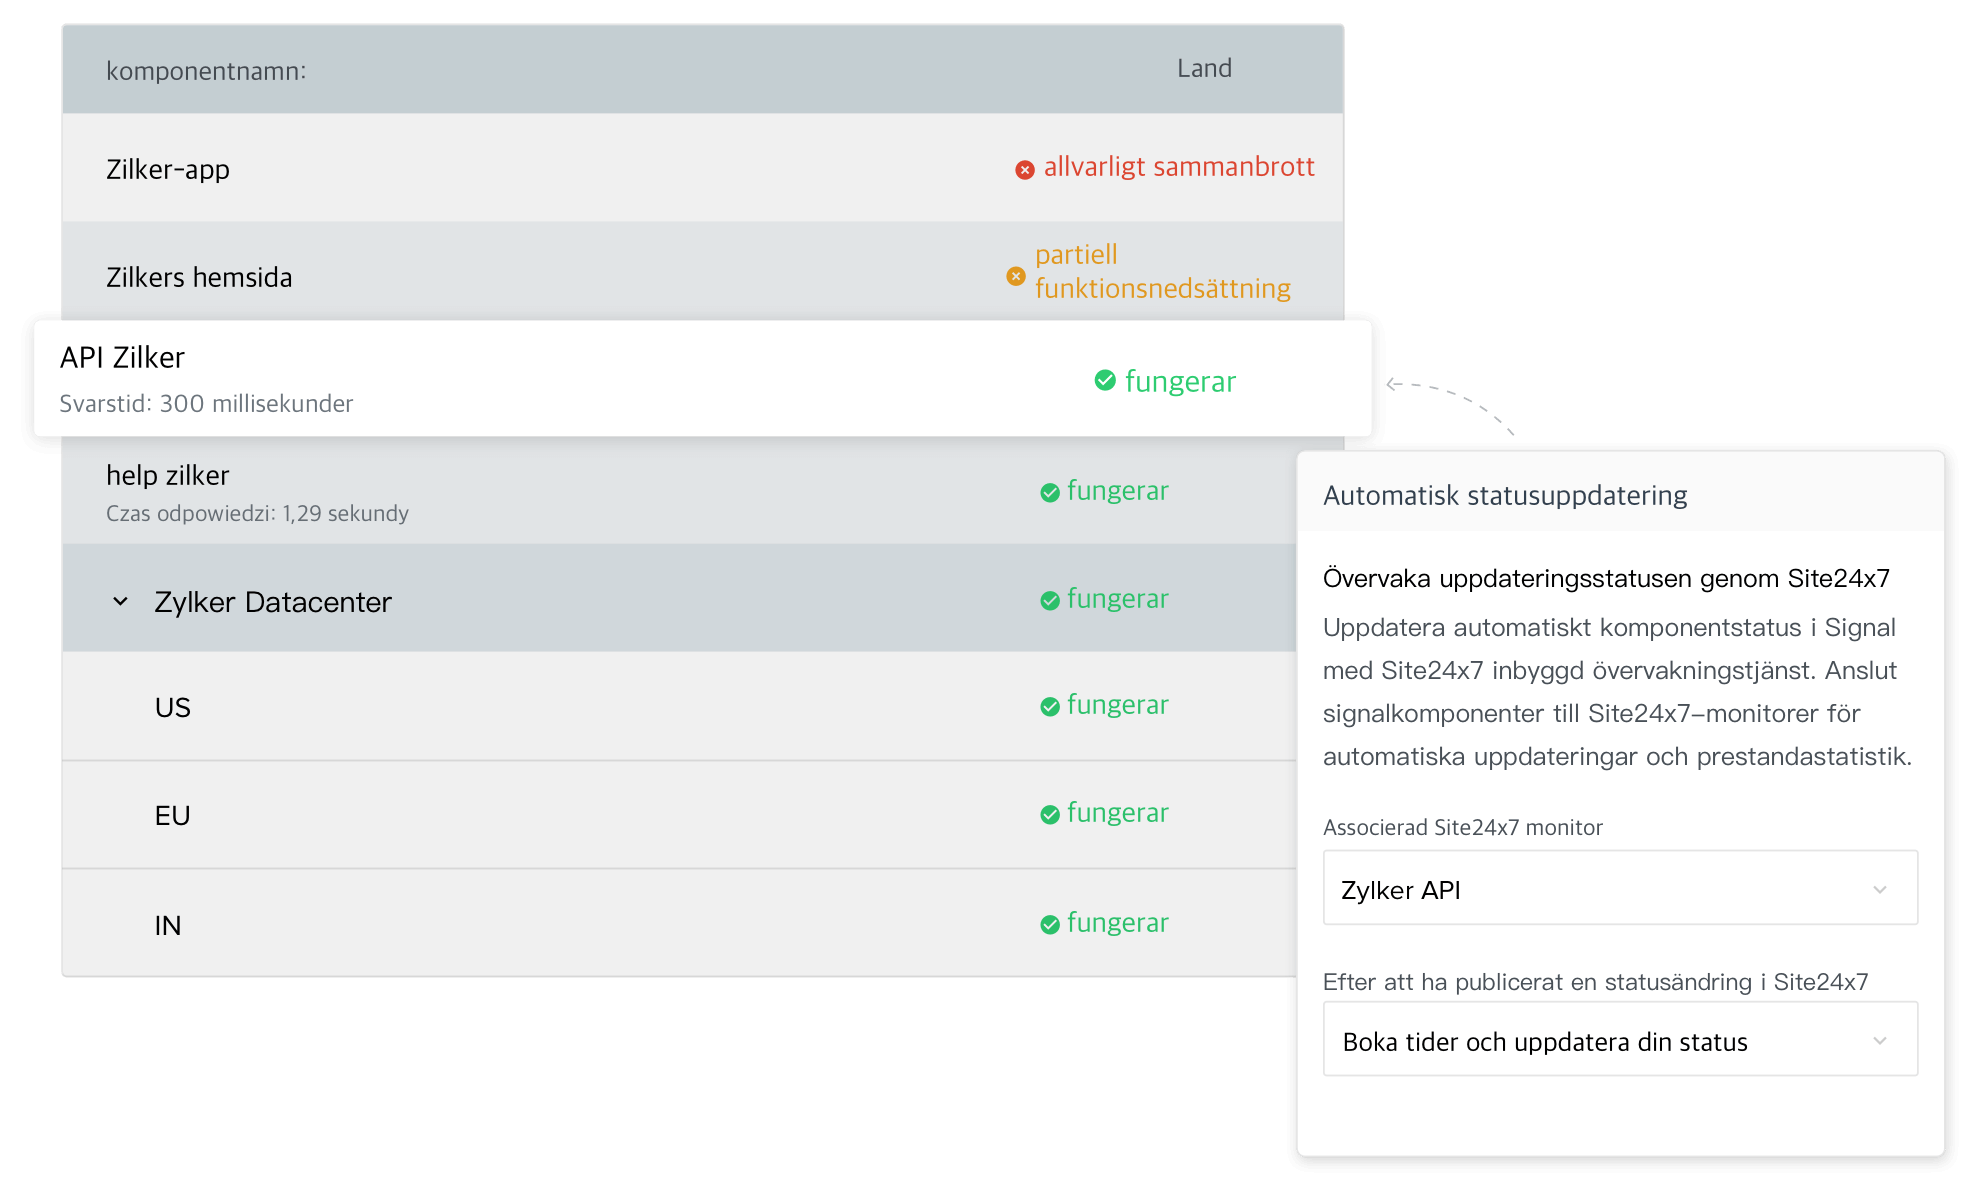 How you can sync status updates of components via Site24x7